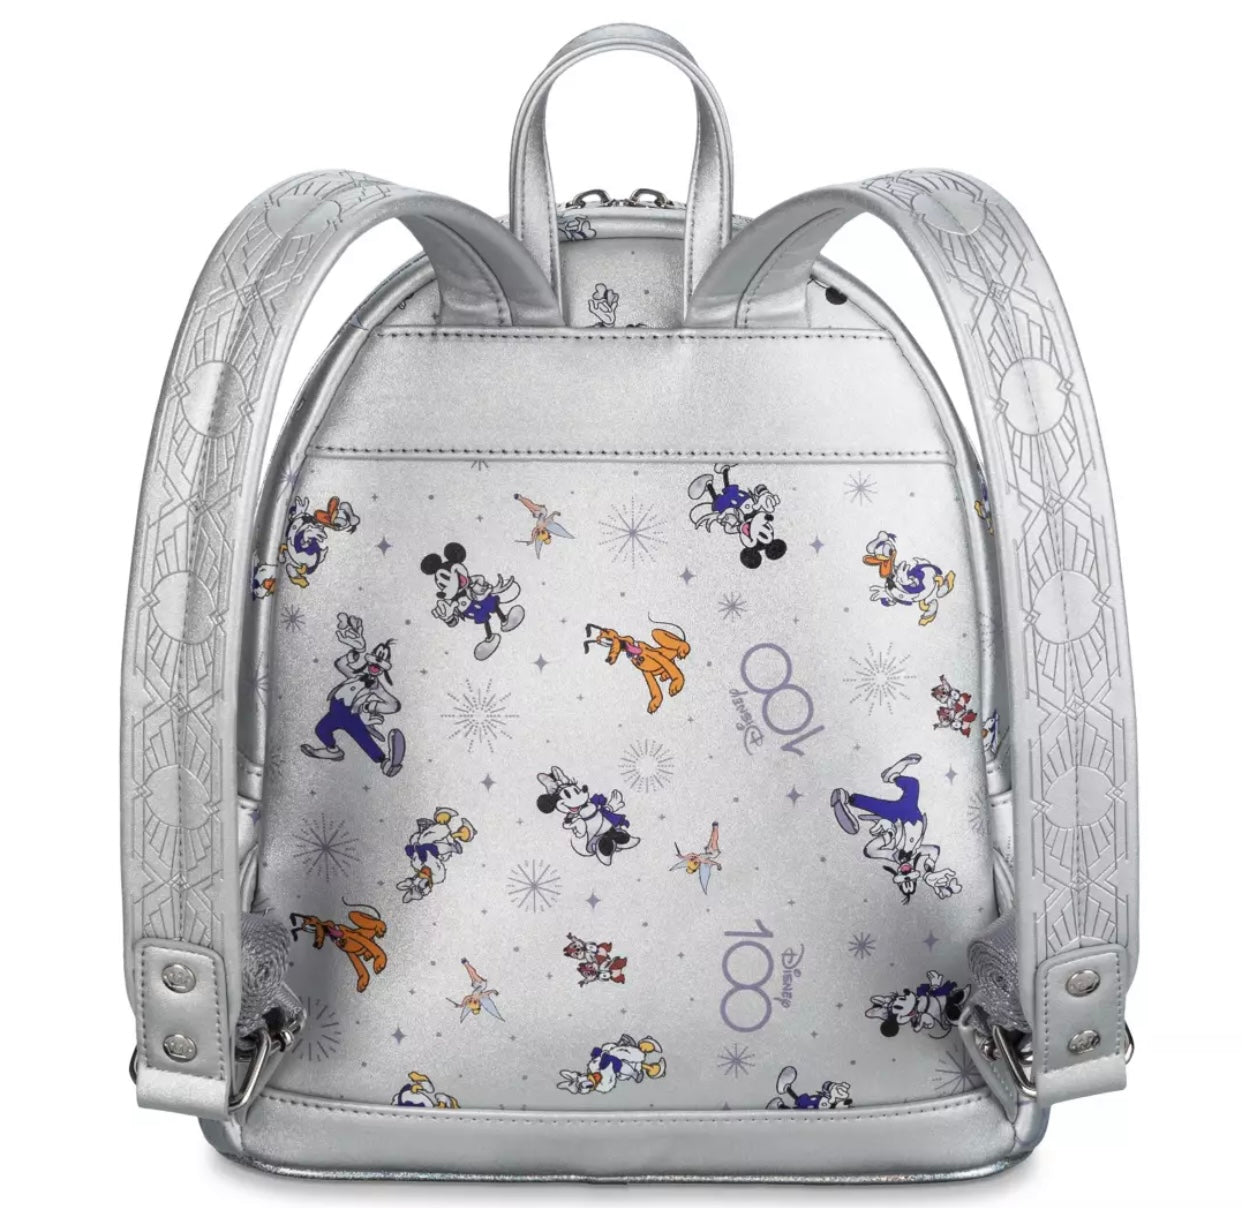 Mickey Mouse and Friends Disney100 Loungefly Mini Backpack